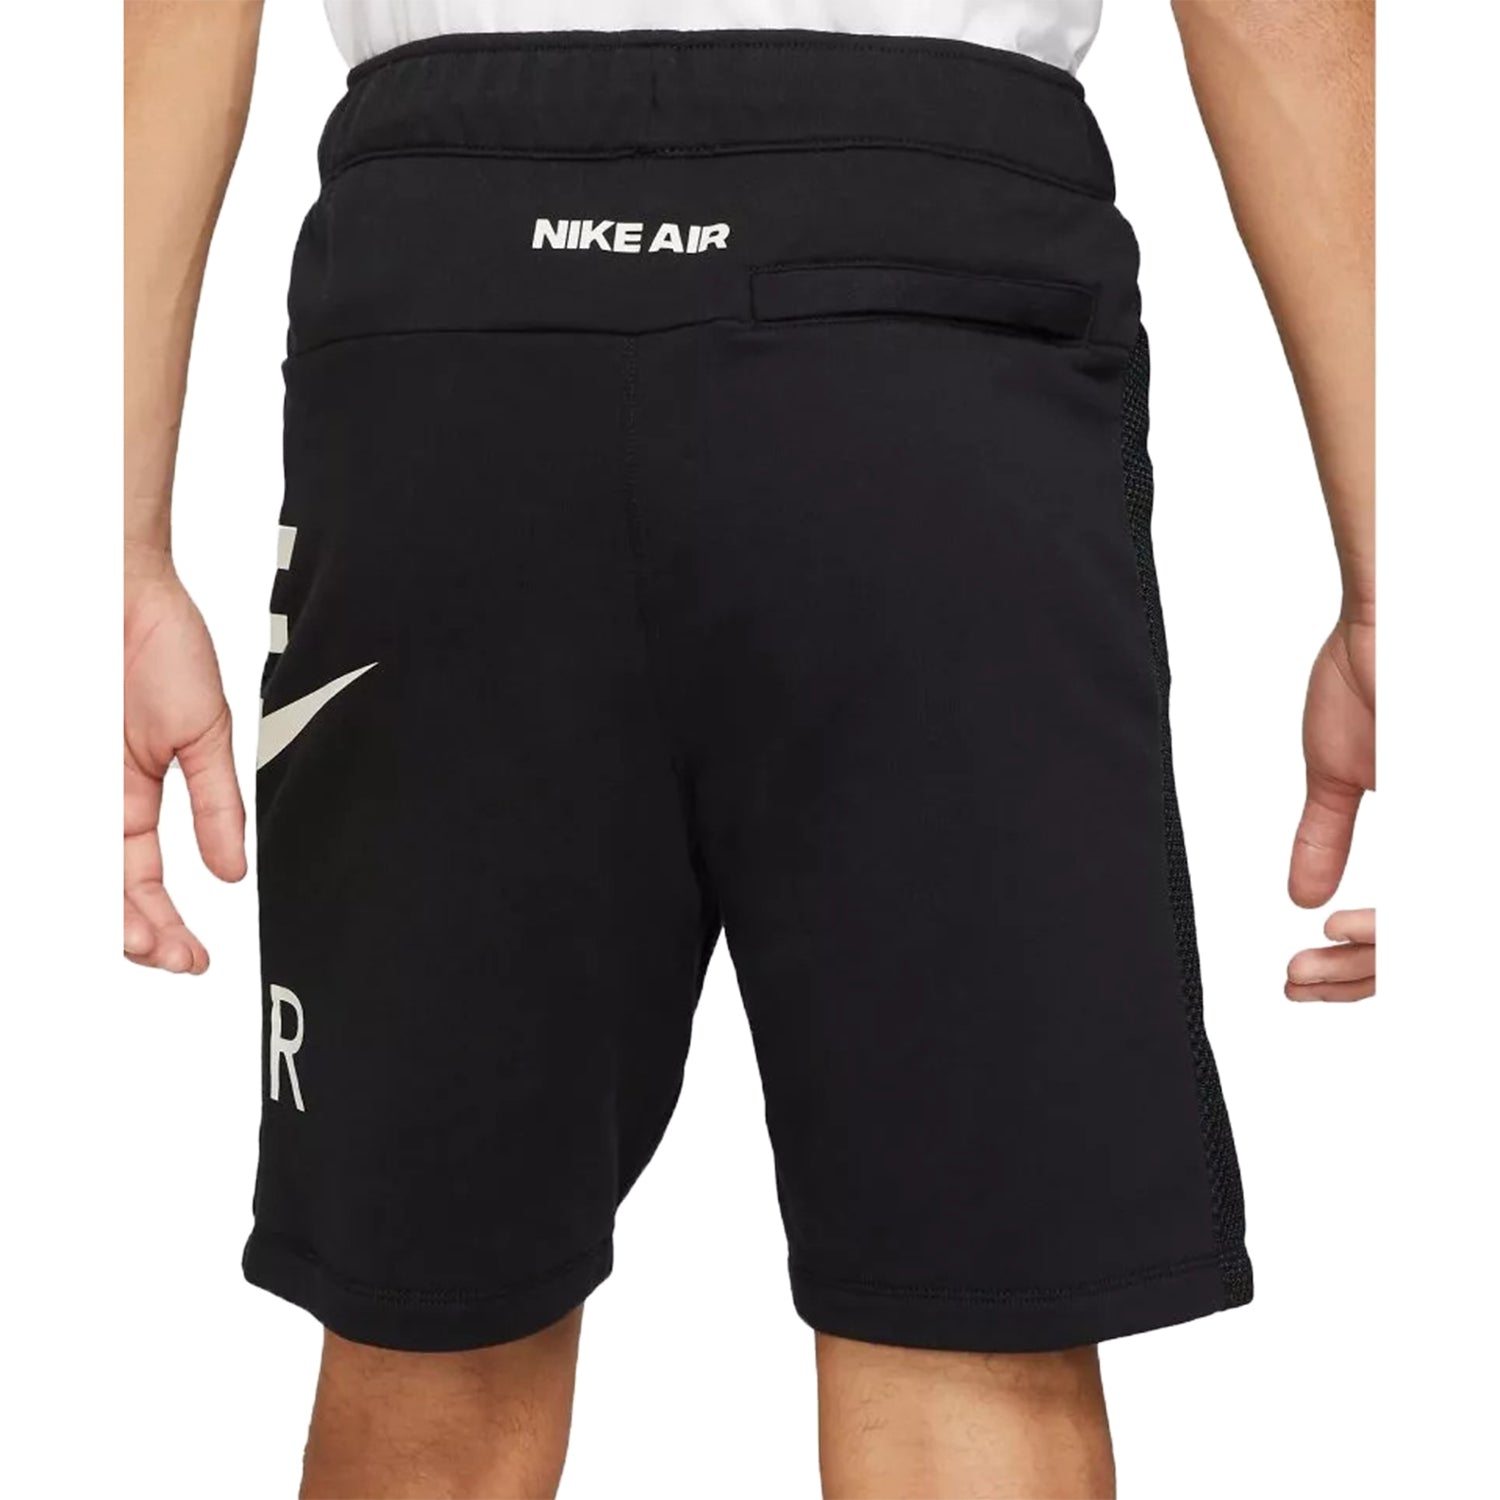 Nike Air French Terry Shorts Mens Style : Dm5211